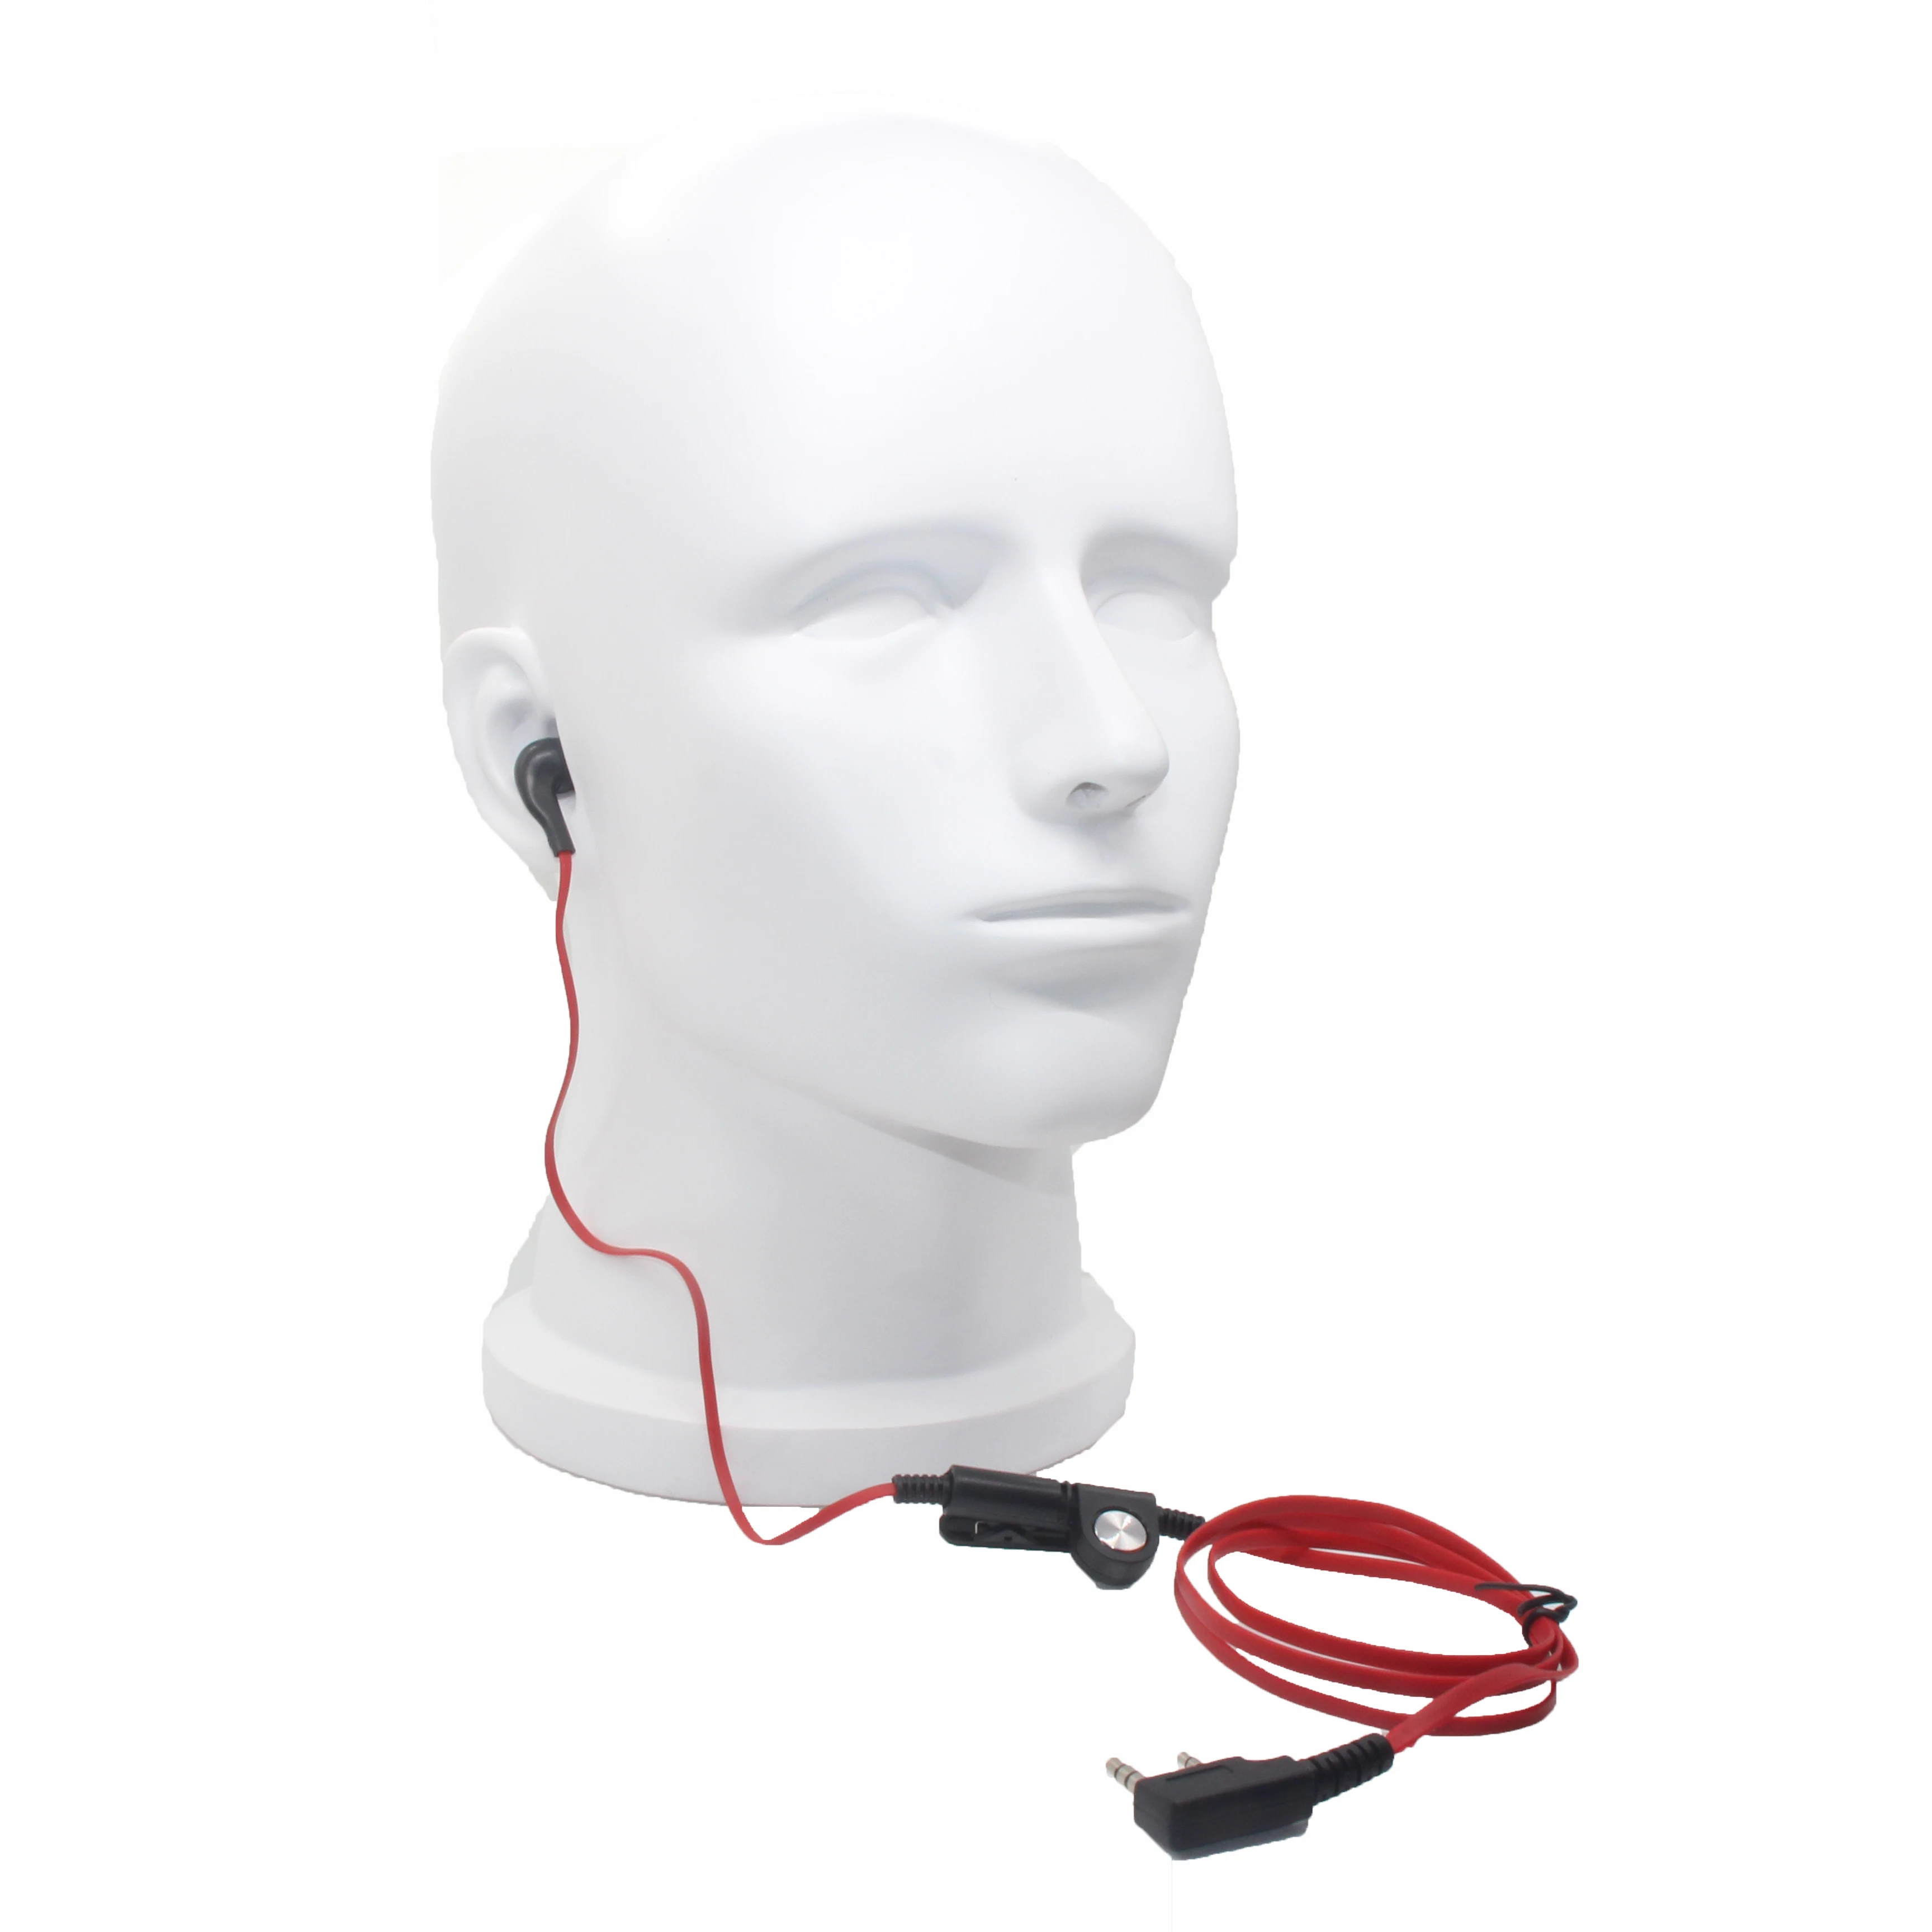 

2 Pin Noodle Style Earbud Headphone K Plug Earpiece Headset For Baofeng Uv5R Bf-888S Uv5R Radio Red Wire